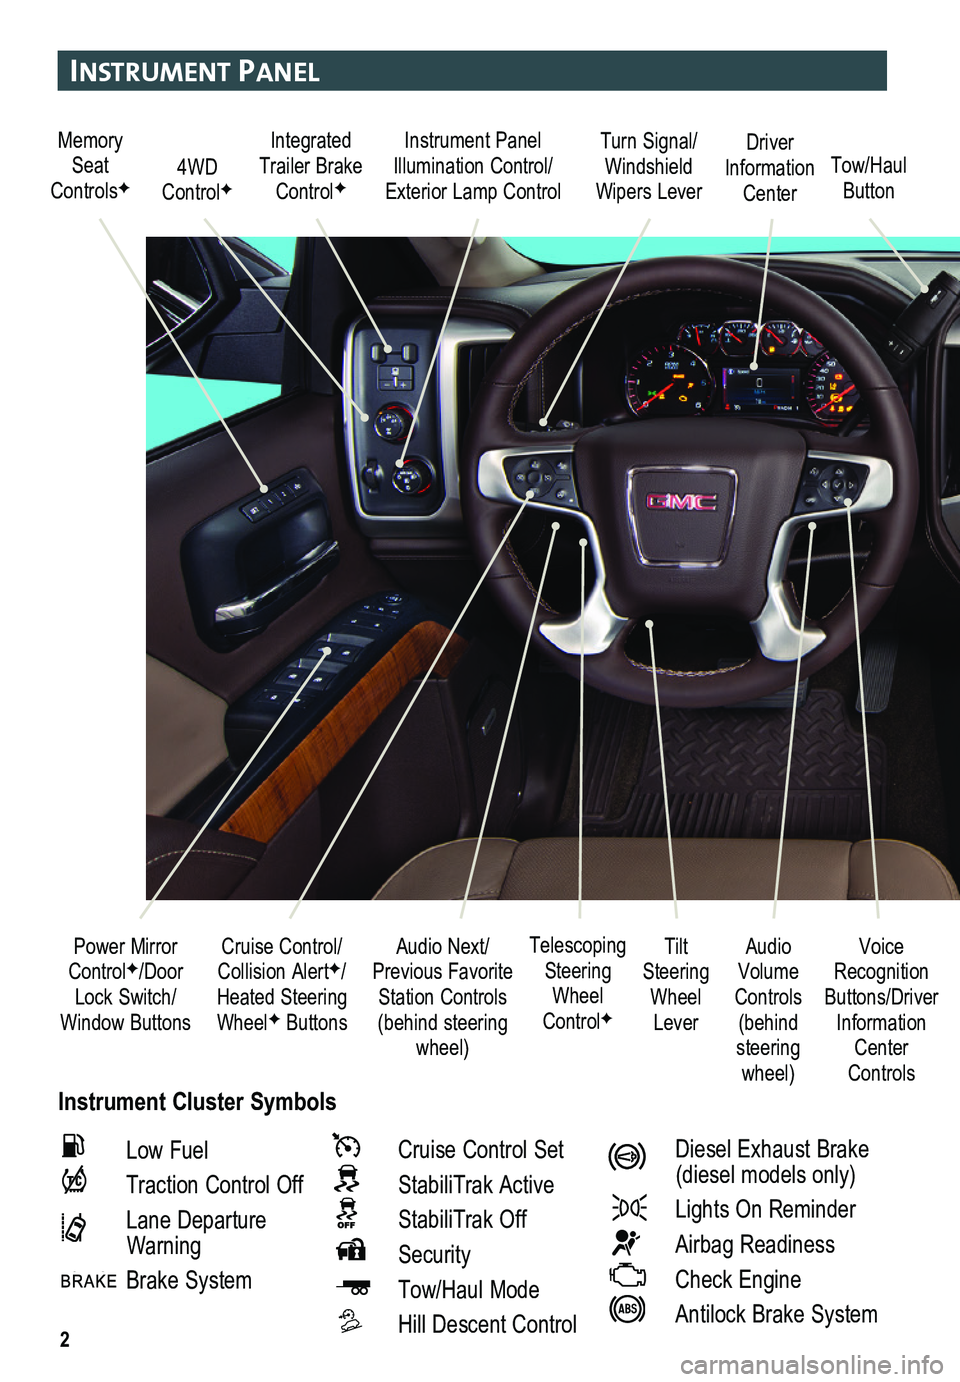 GMC SIERRA HD 2015  Get To Know Guide 2
Instrument Panel
Instrument Cluster Symbols
Audio Next/Previous Favorite Station Controls (behind steering wheel)
Cruise Control/ Collision AlertF/Heated Steering WheelF Buttons
Power Mirror Control